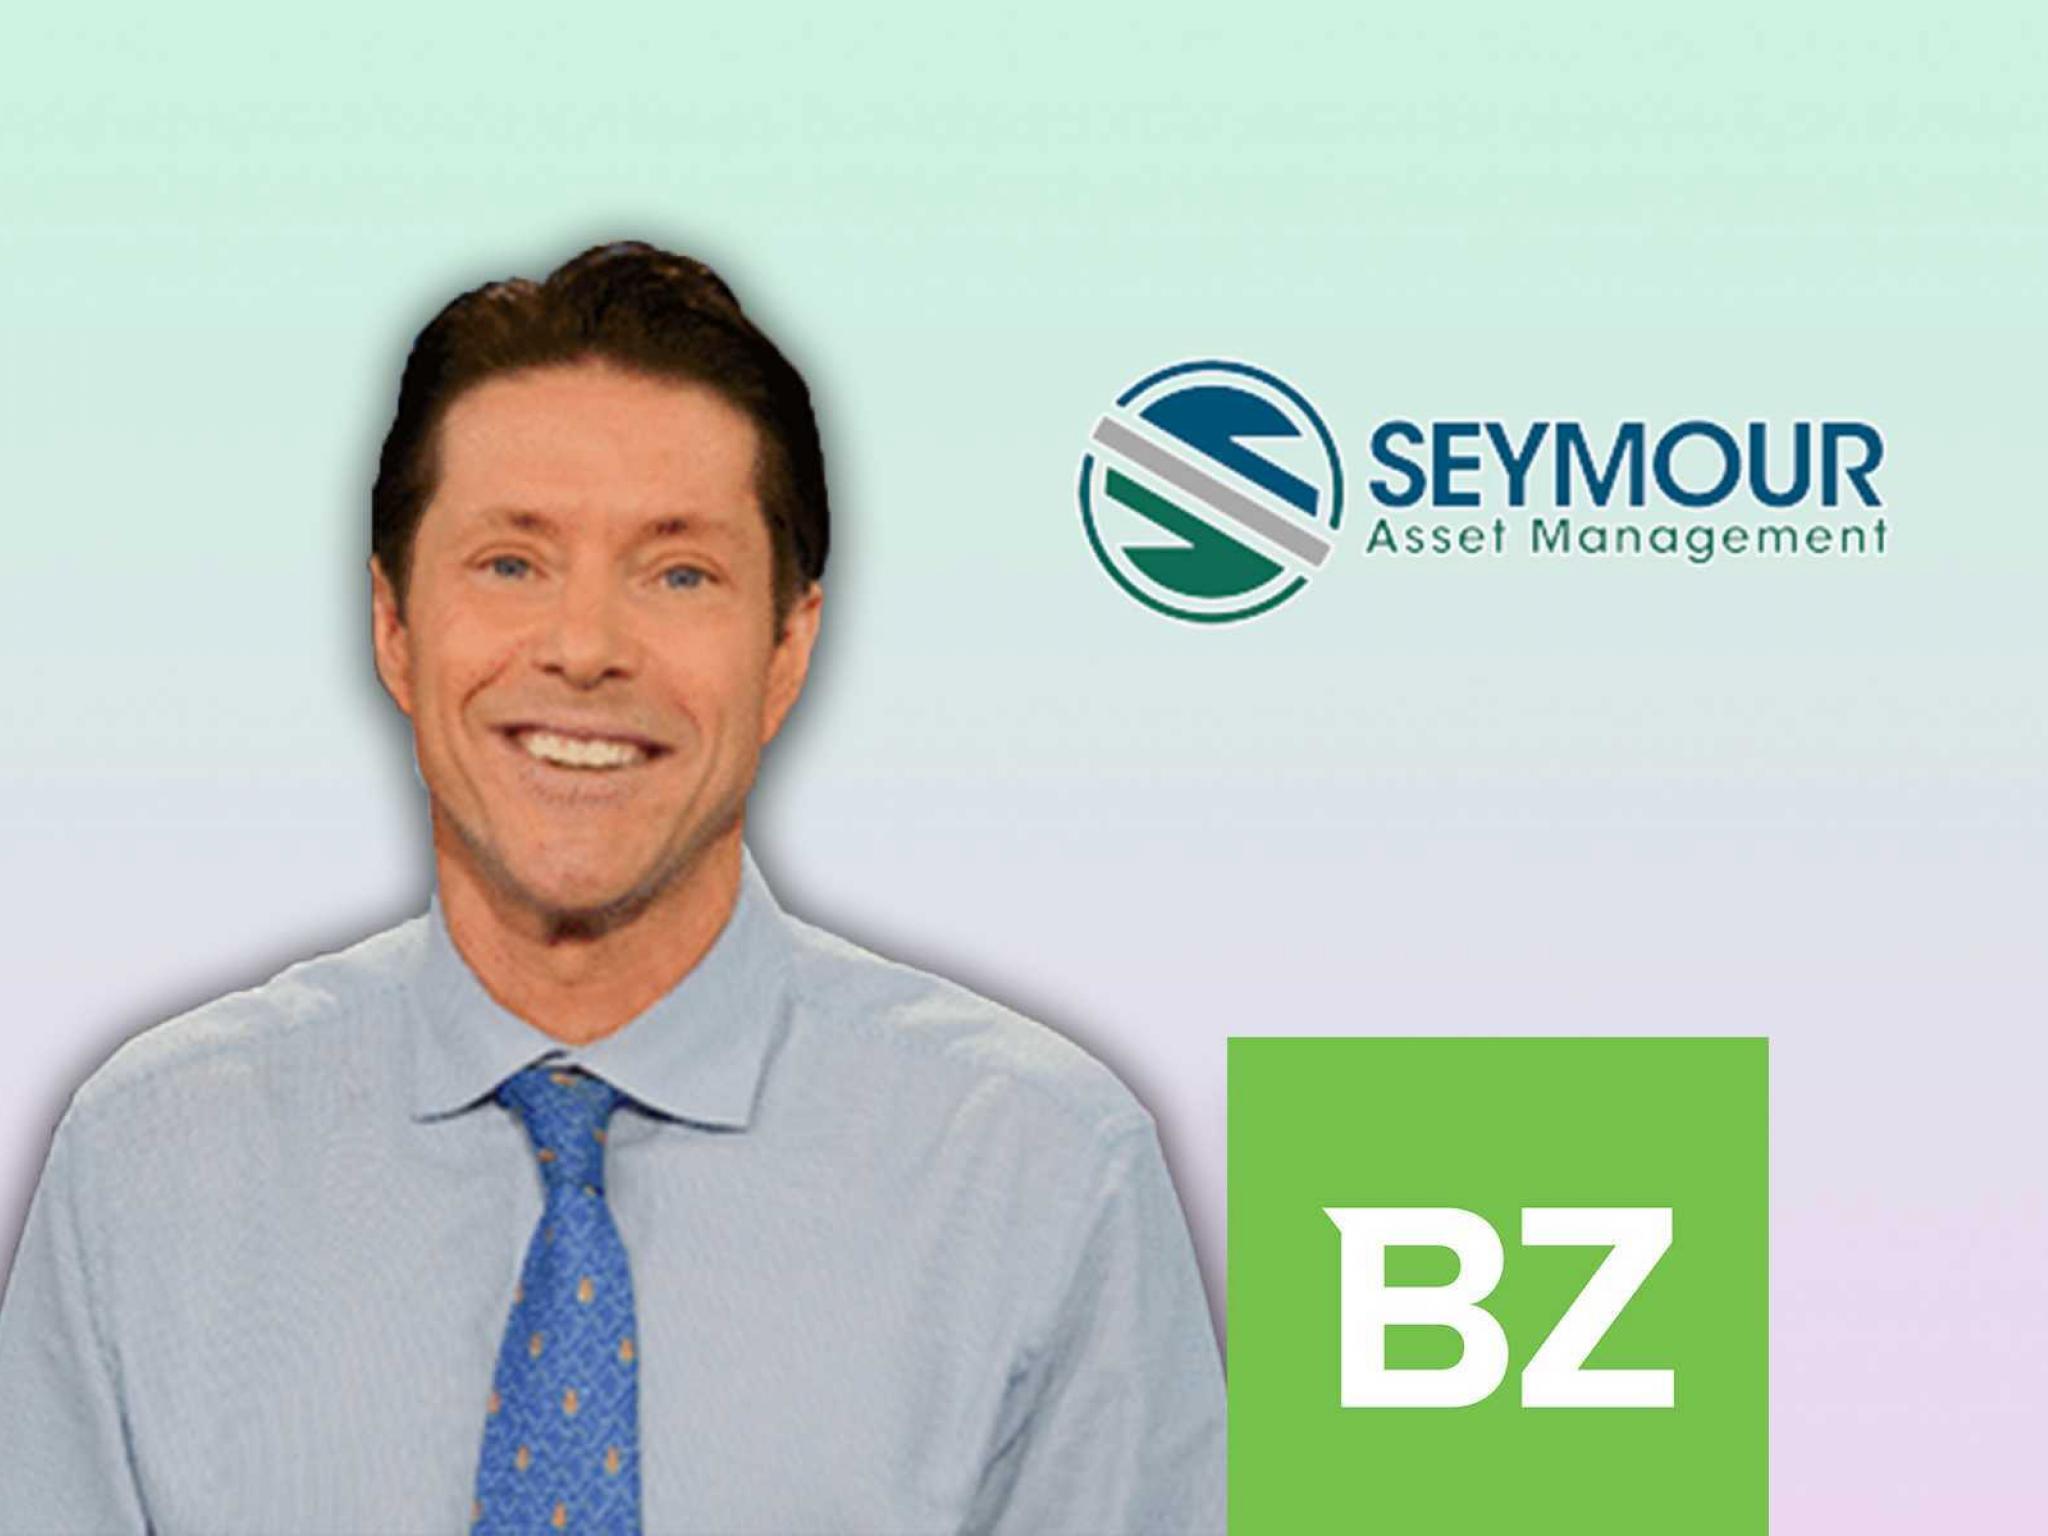  cnbcs-tim-seymour-says-cannabis-investors-may-find-positive-catalysts-in-unexpected-places 